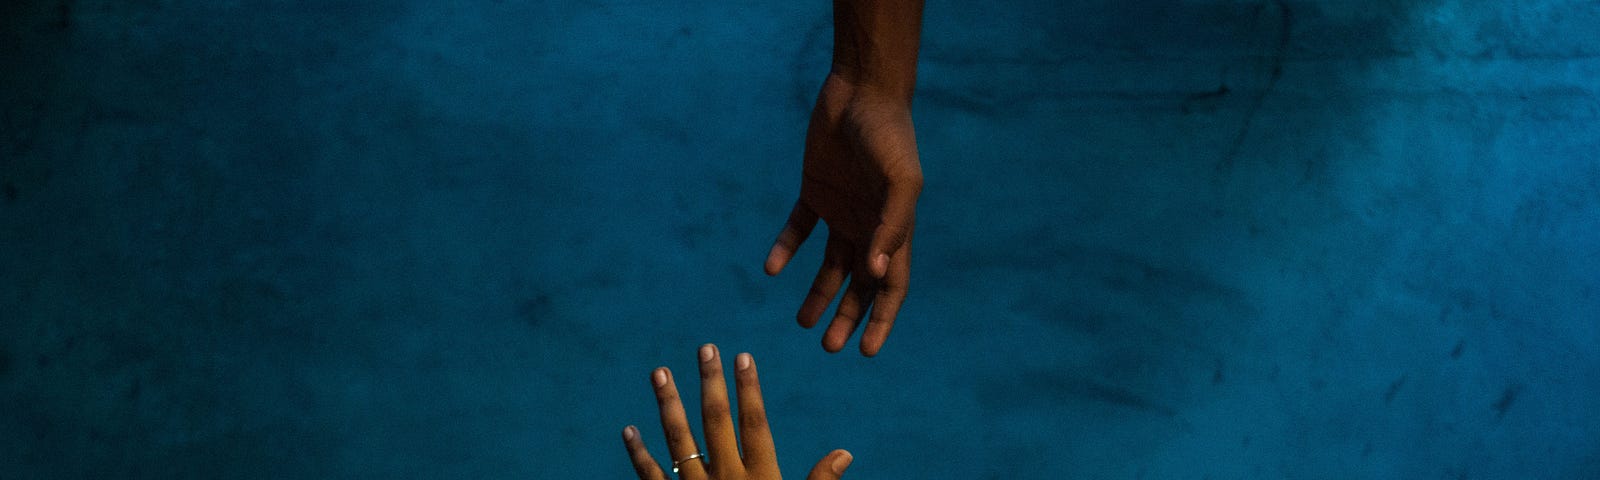 Hands reaching out to each other under water